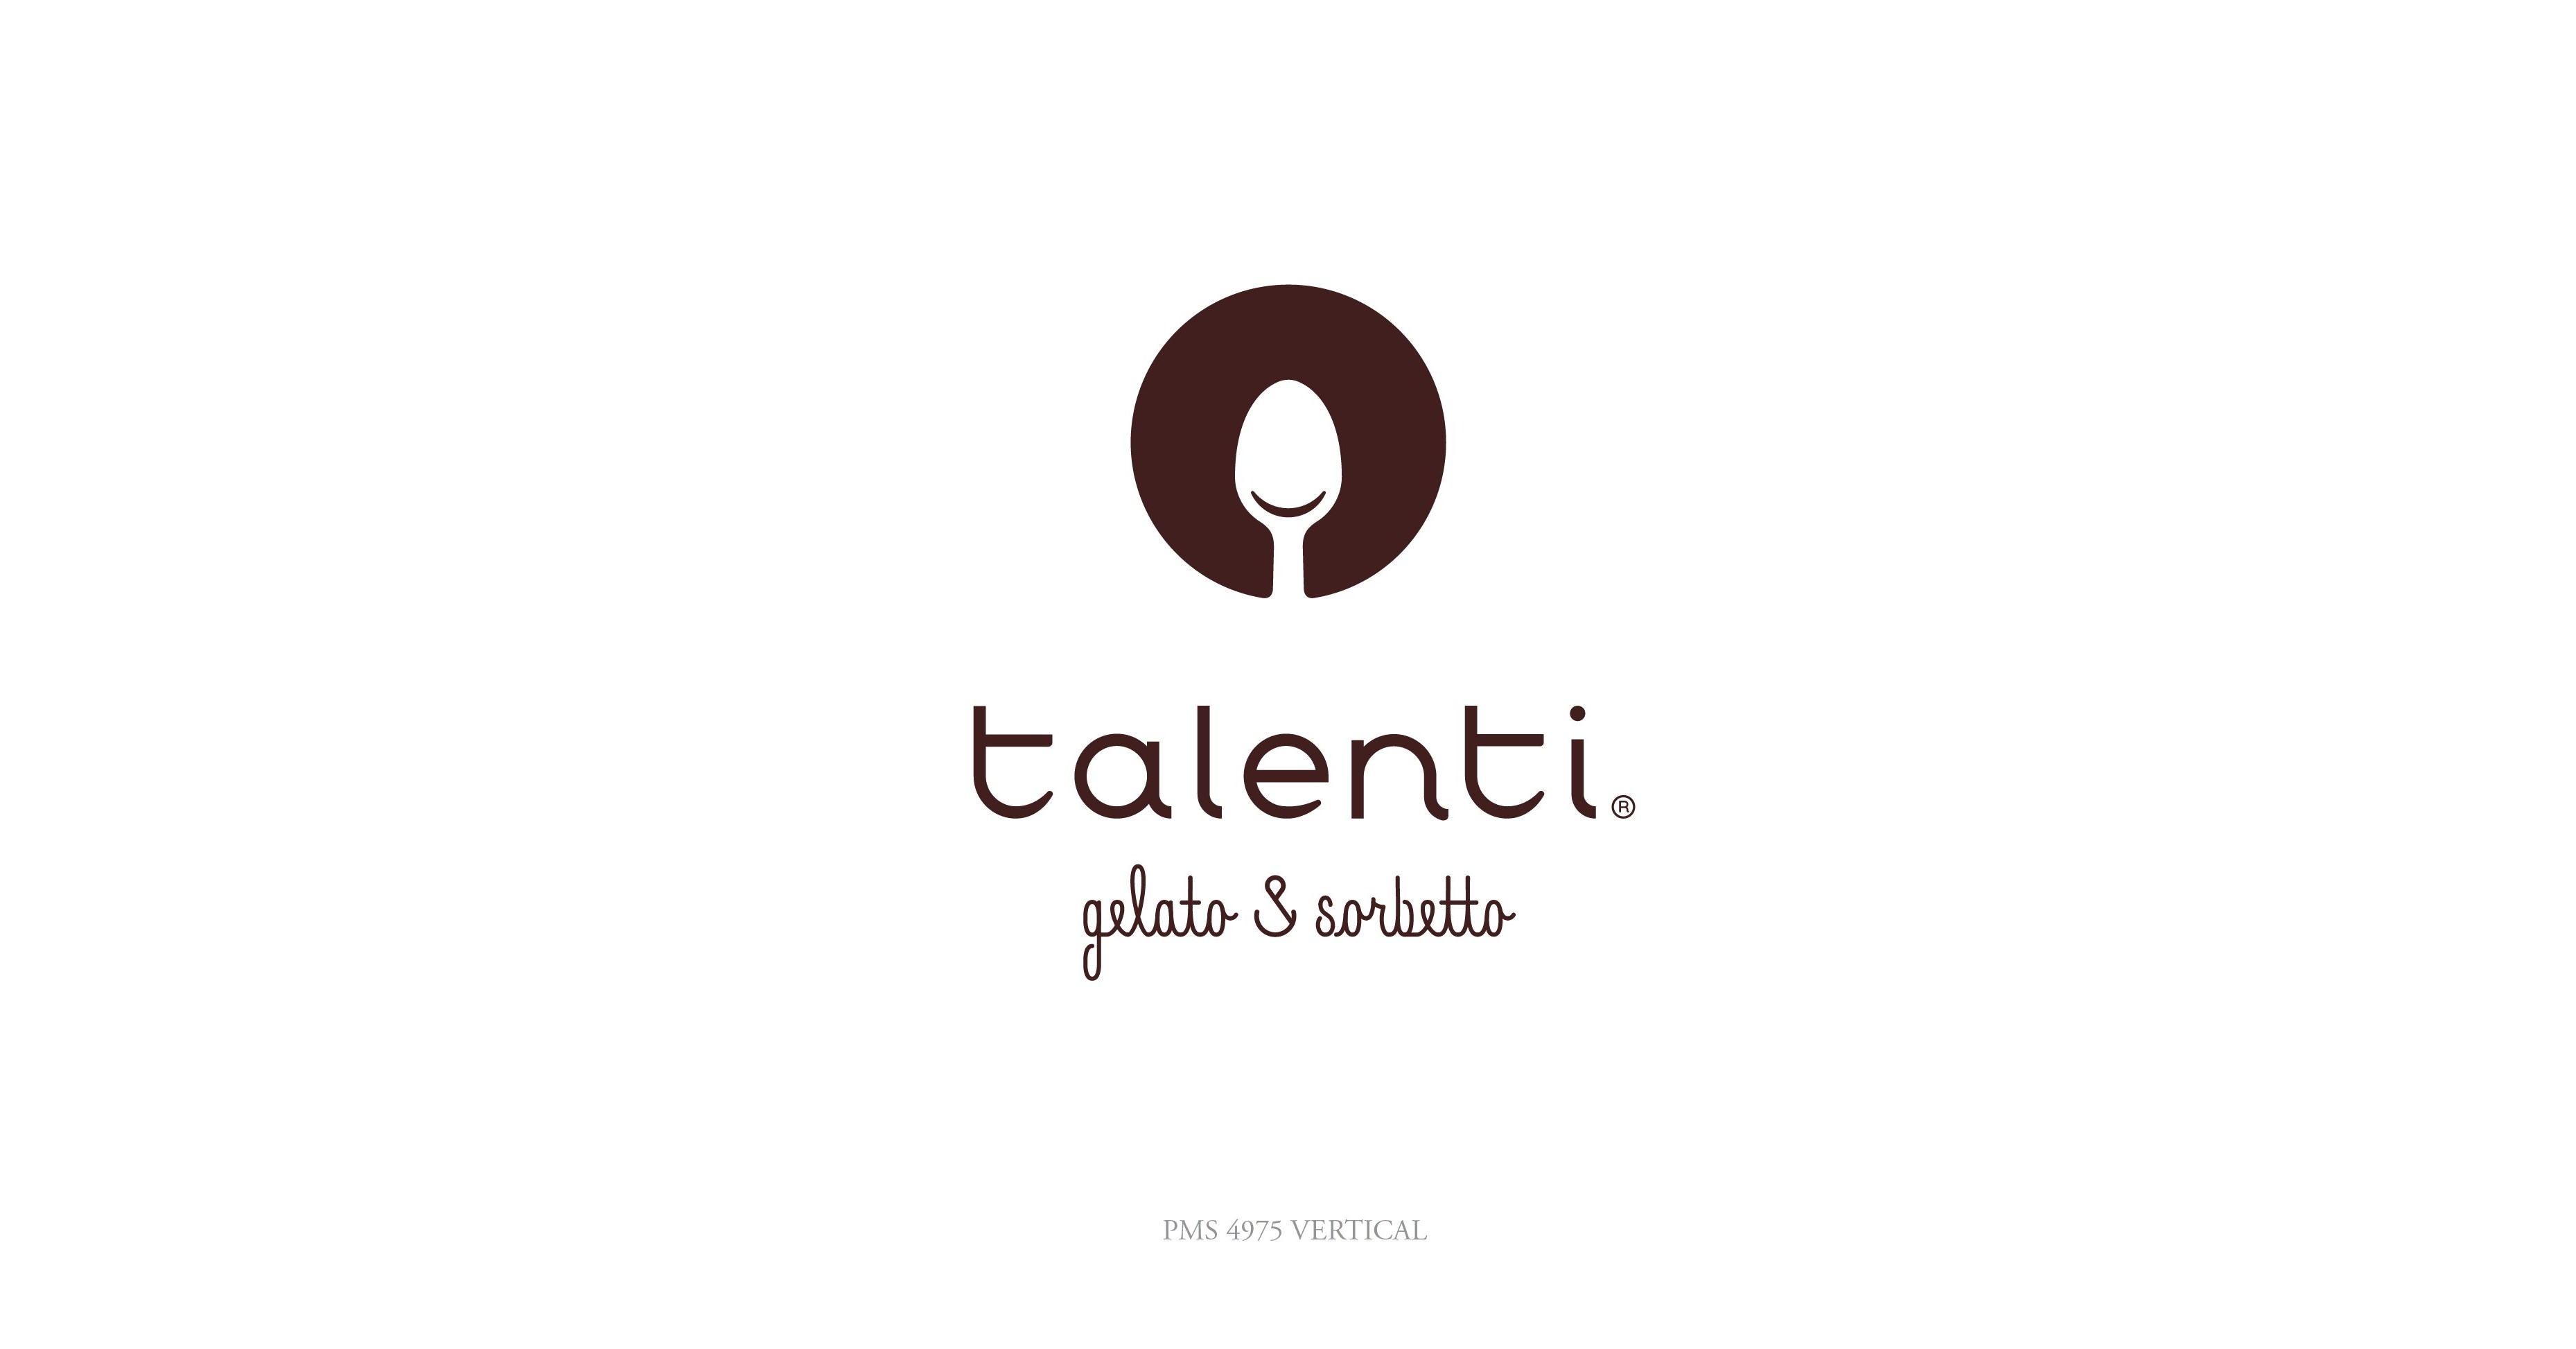 Save on Talenti Gelato Layers Coffee Cookie Crumble Order Online